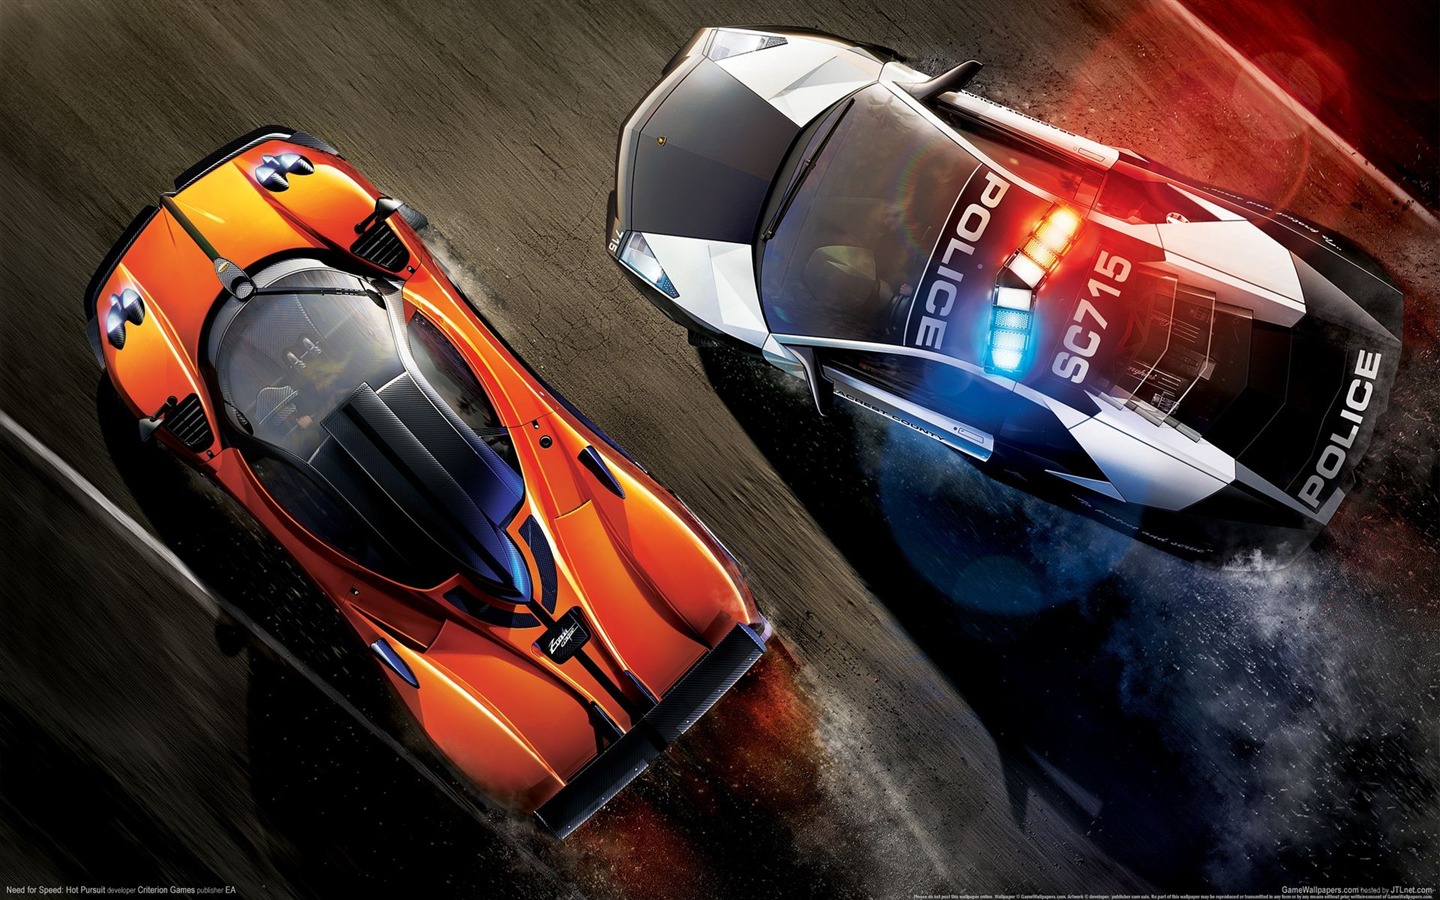 Need for Speed: Hot Pursuit 极品飞车14：热力追踪1 - 1440x900